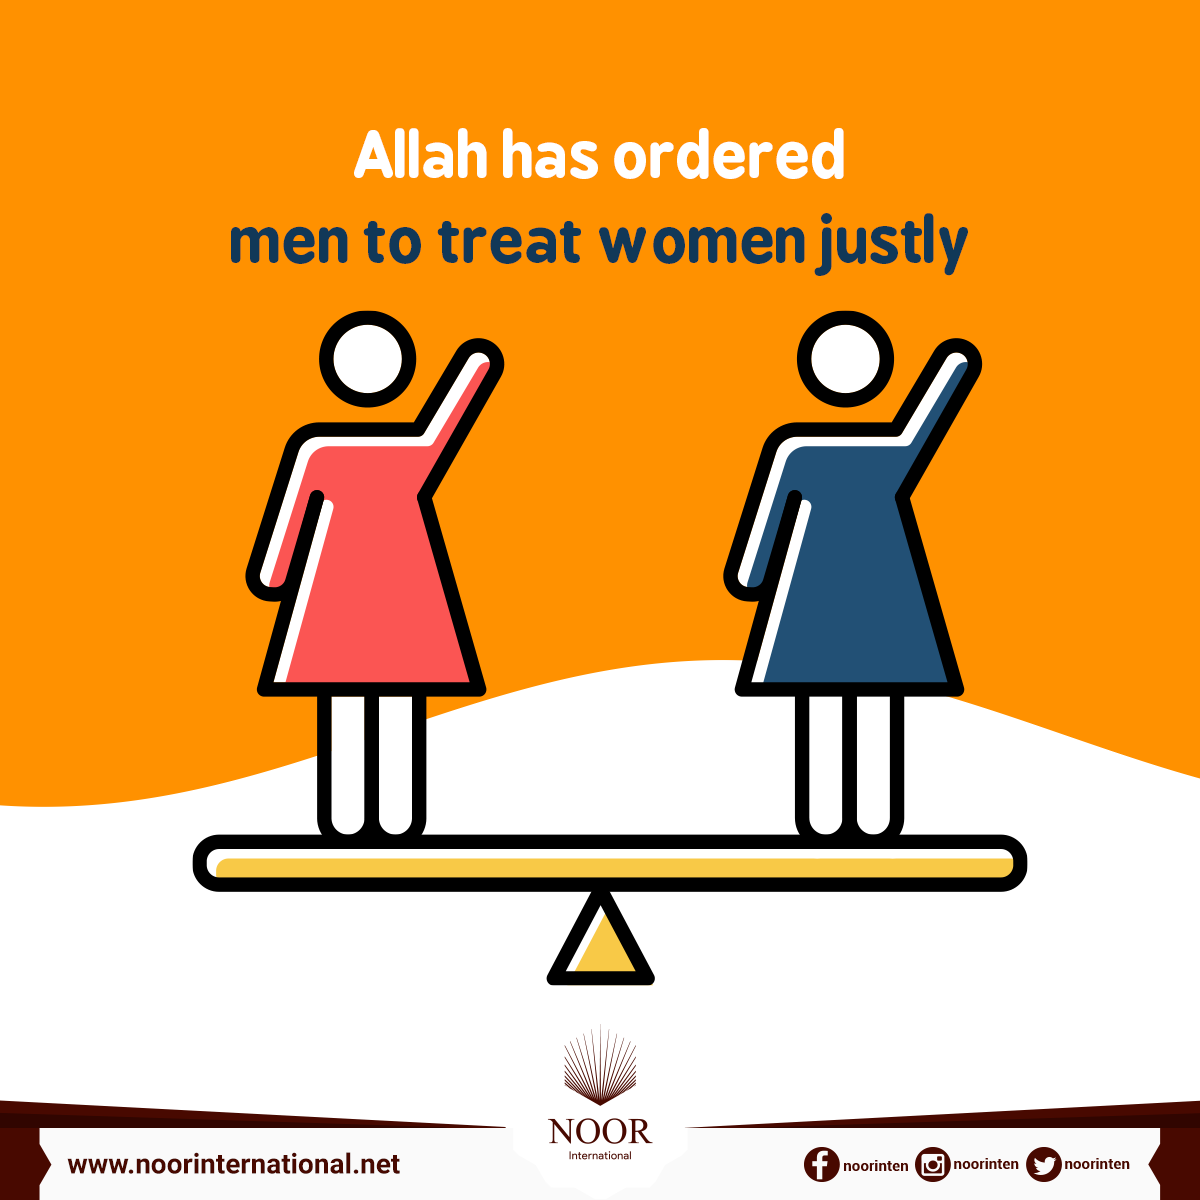 Allah has ordered men to treat women justly